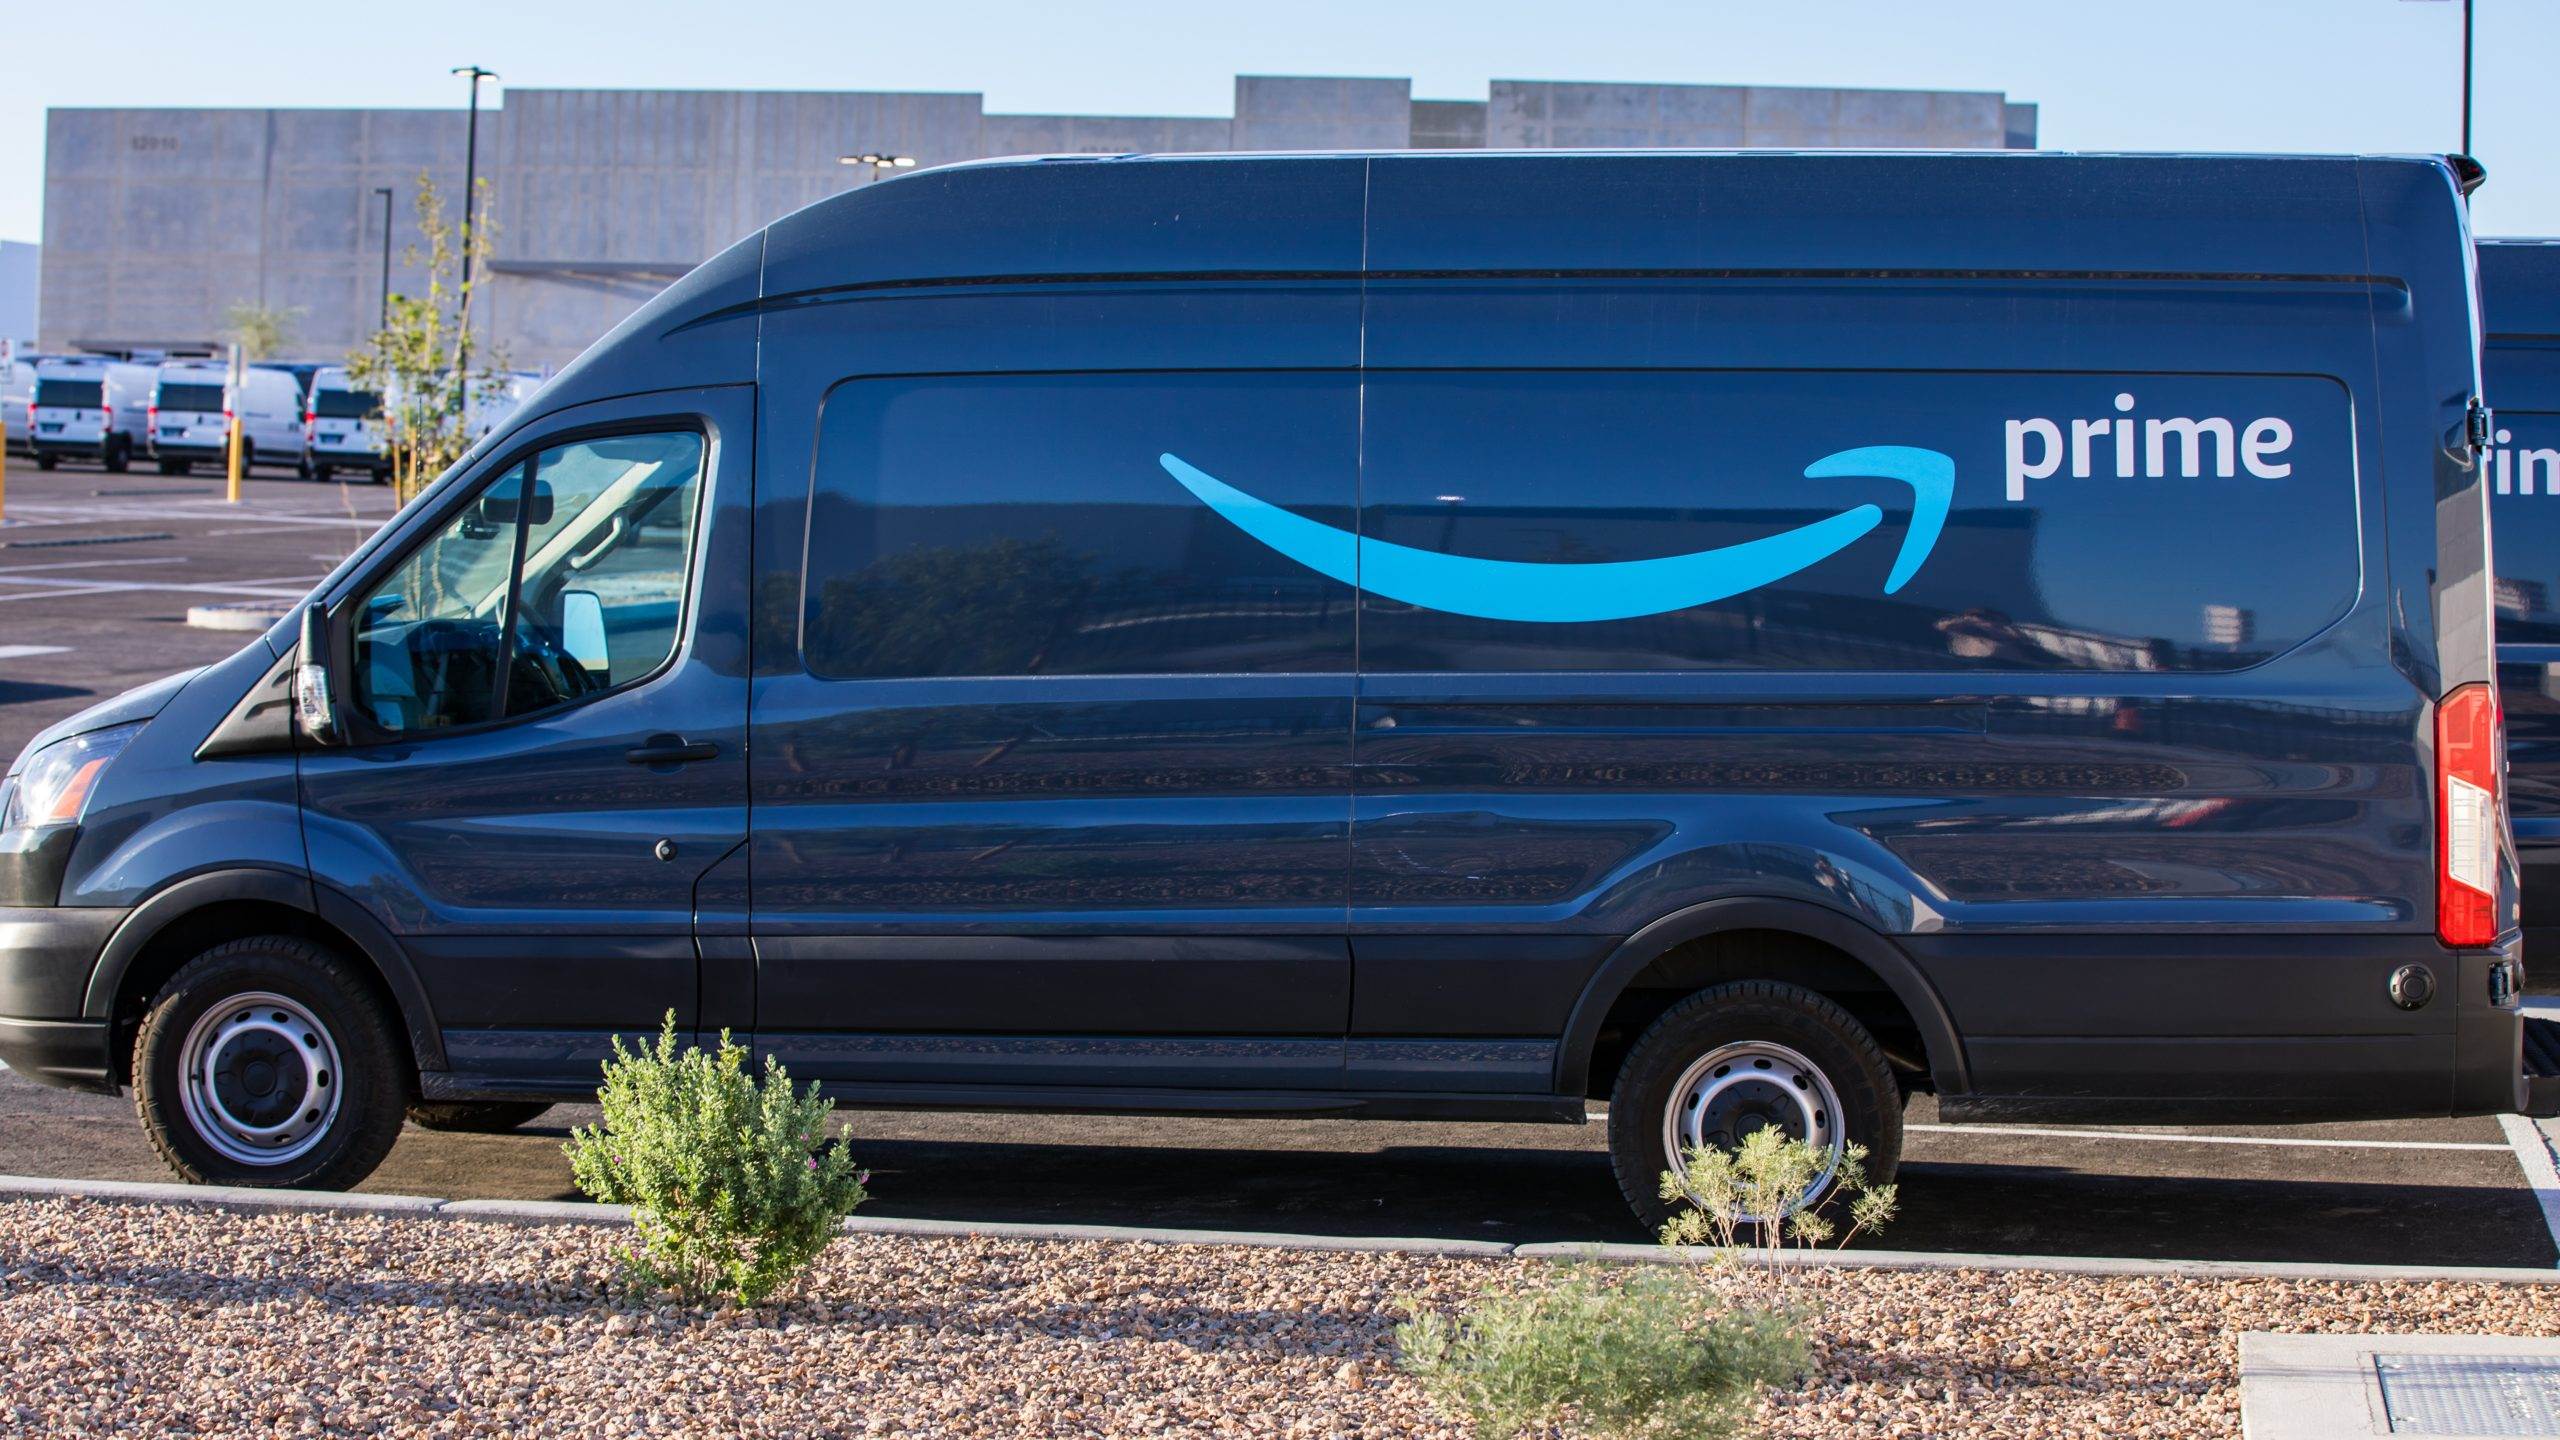 https://www.bergerandgreen.com/wp-content/uploads/2022/02/can-you-sue-amazon-if-a-delivery-driver-hits-your-car-scaled.jpeg